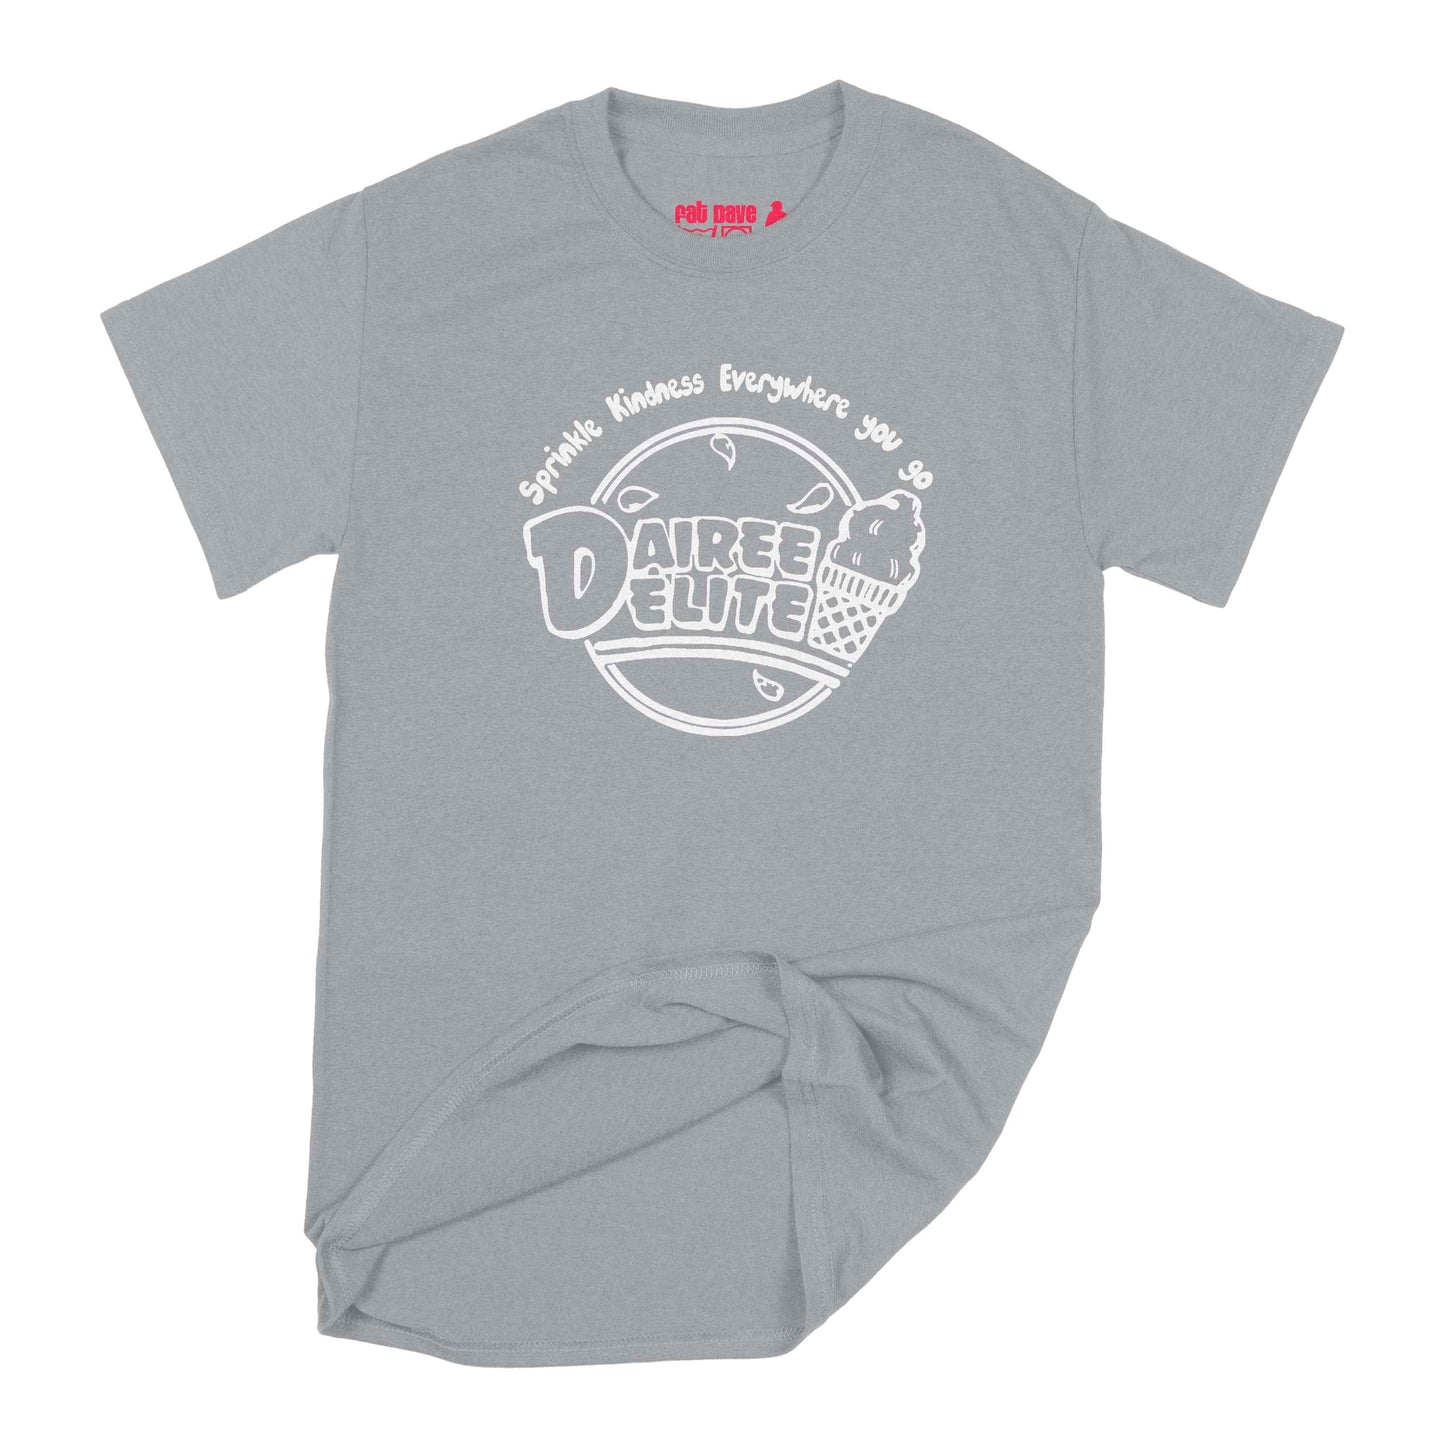 Dairee Delite 70th Anniversary Sprinkle Kindness T-Shirt Small Sport Grey